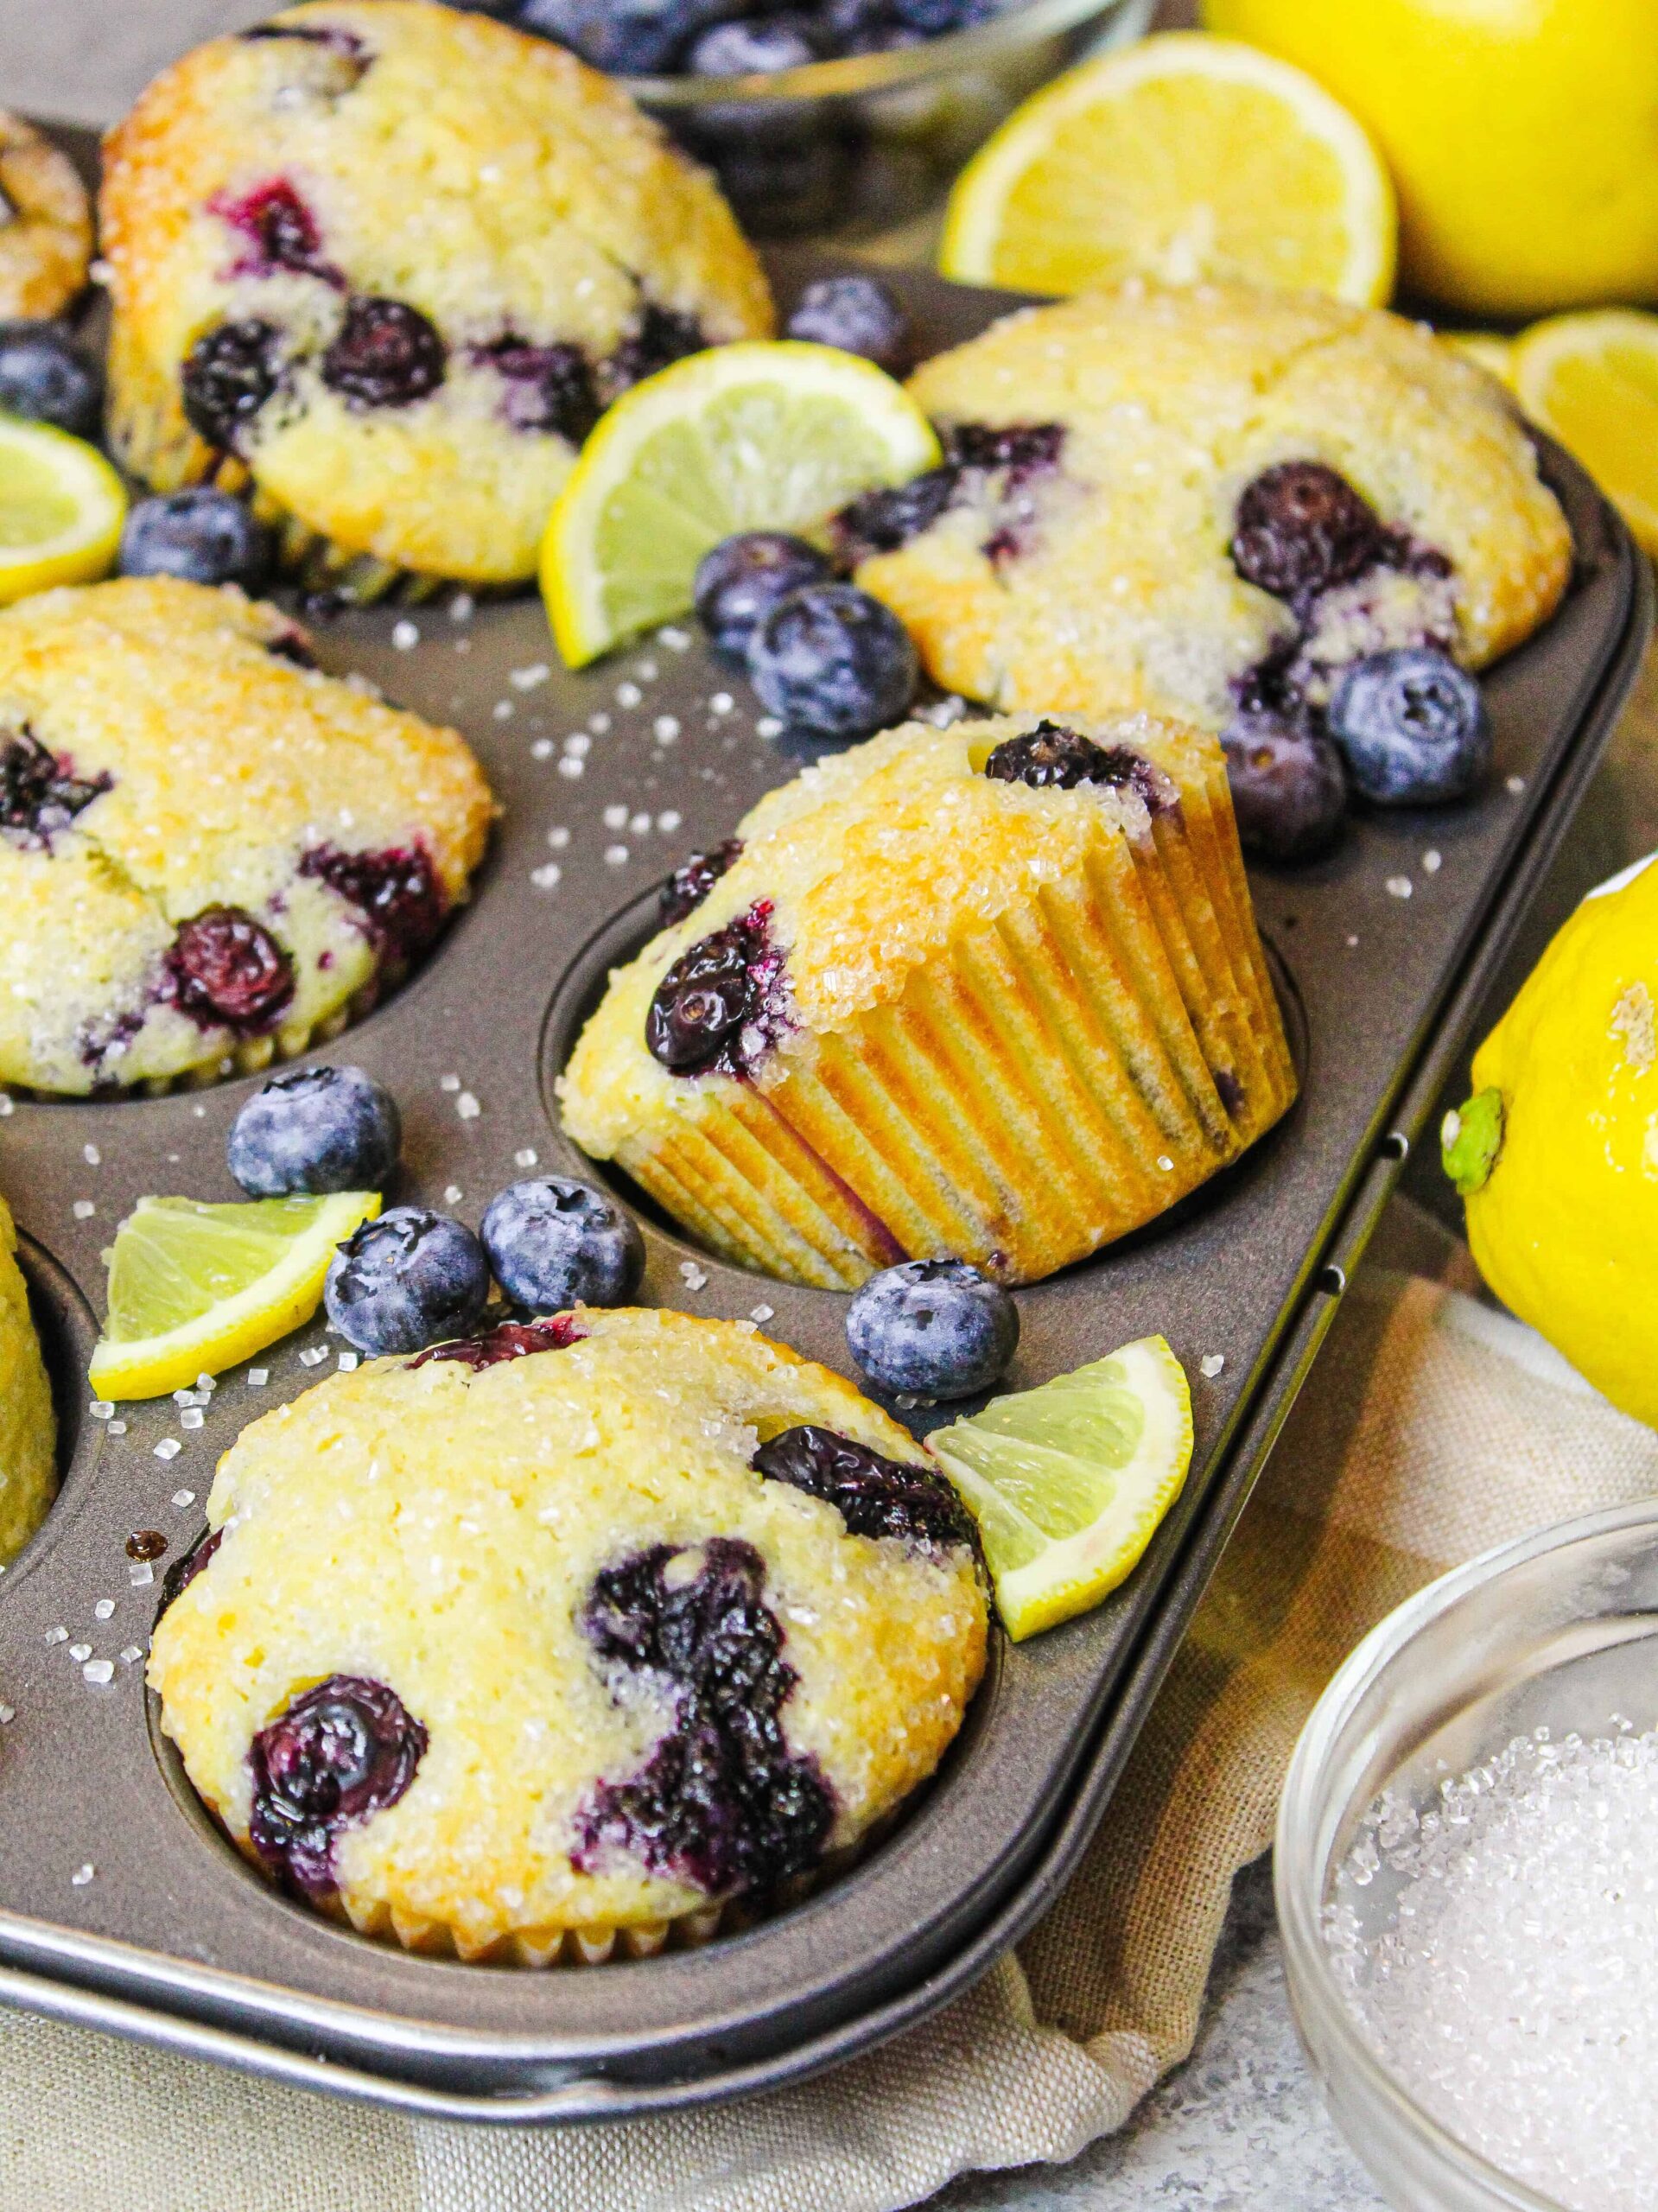 image of lemon blueberry muffins made with yogurt for extra moisture